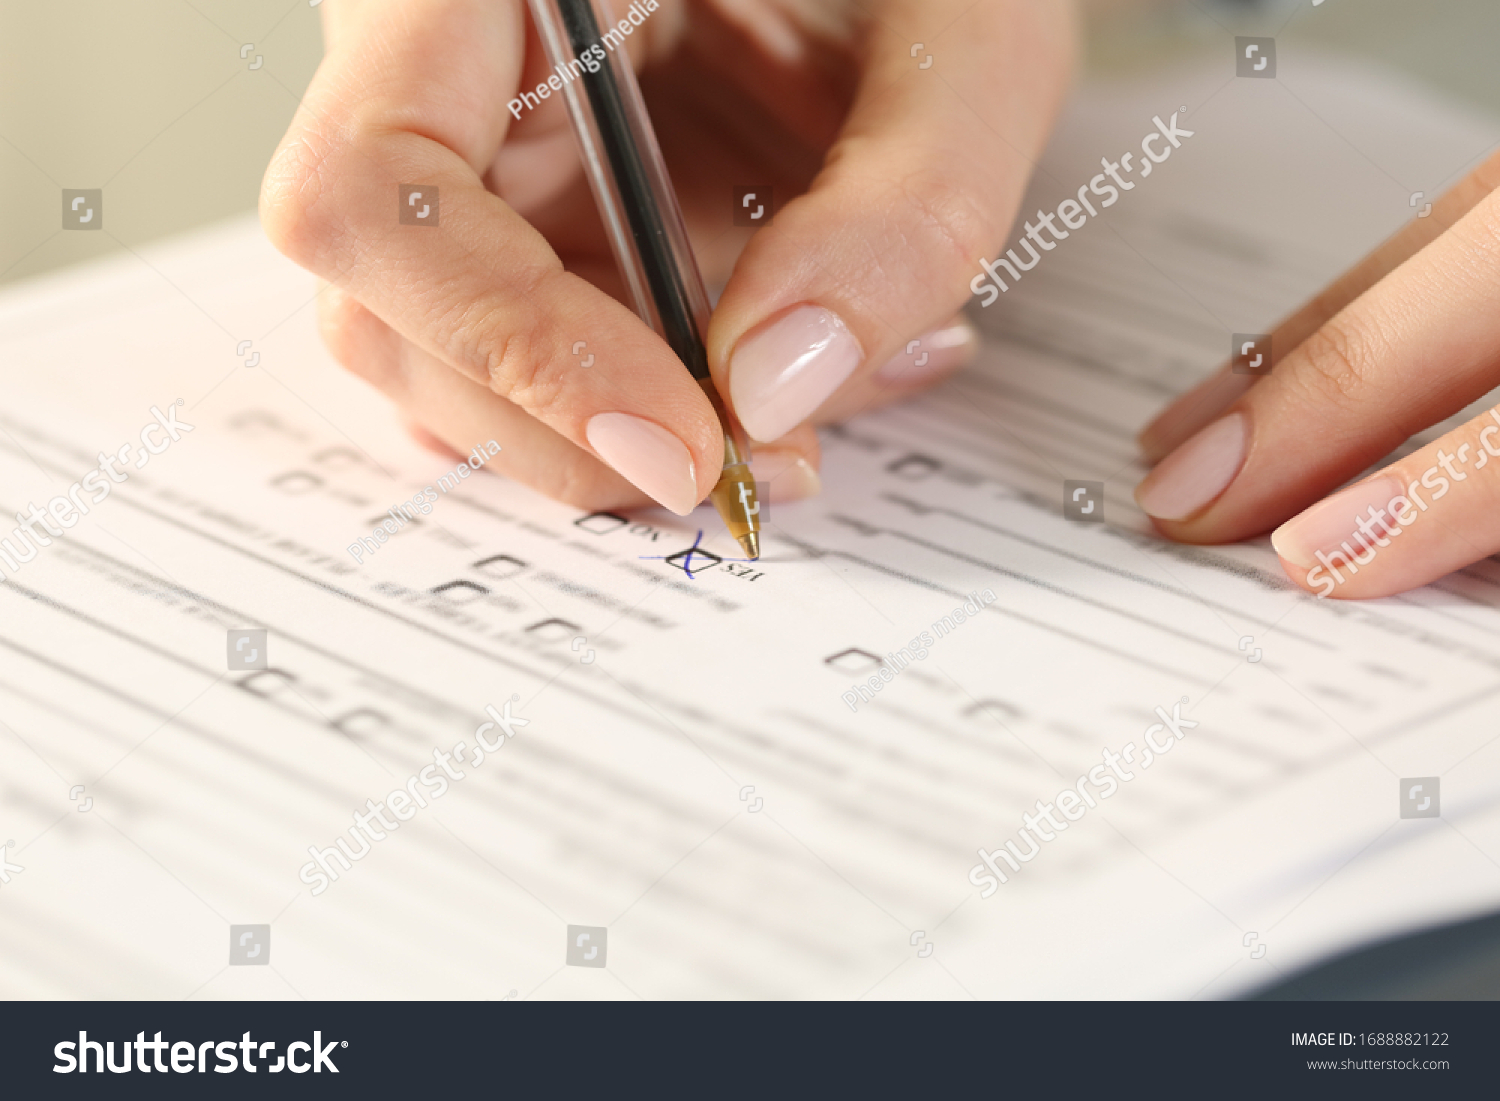 Close up of woman hands filling form crossing yes checkbox on a desk #1688882122